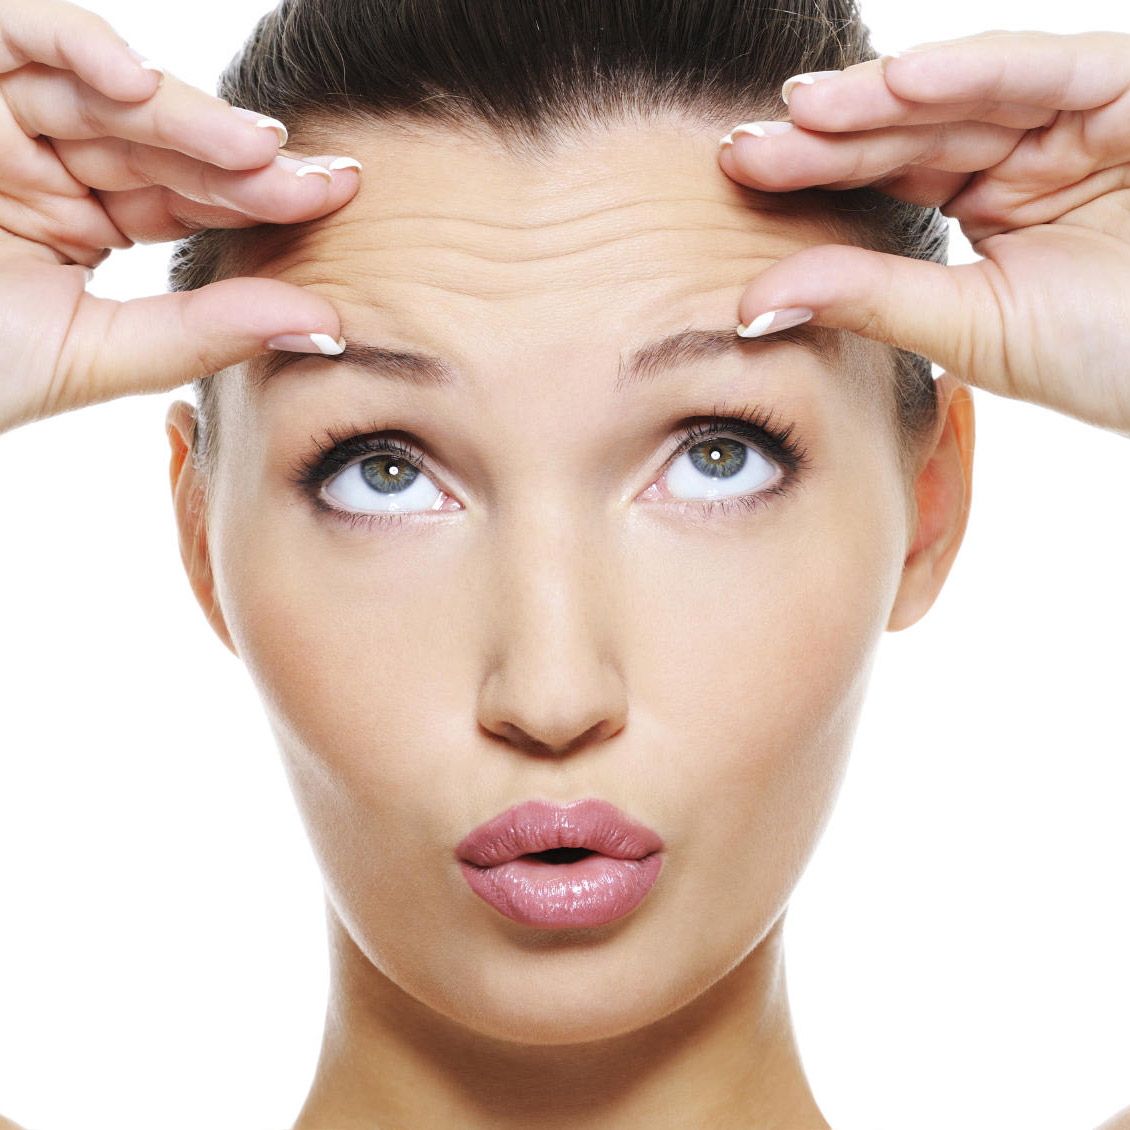 How Long Do Anti-Wrinkle Injections Last?